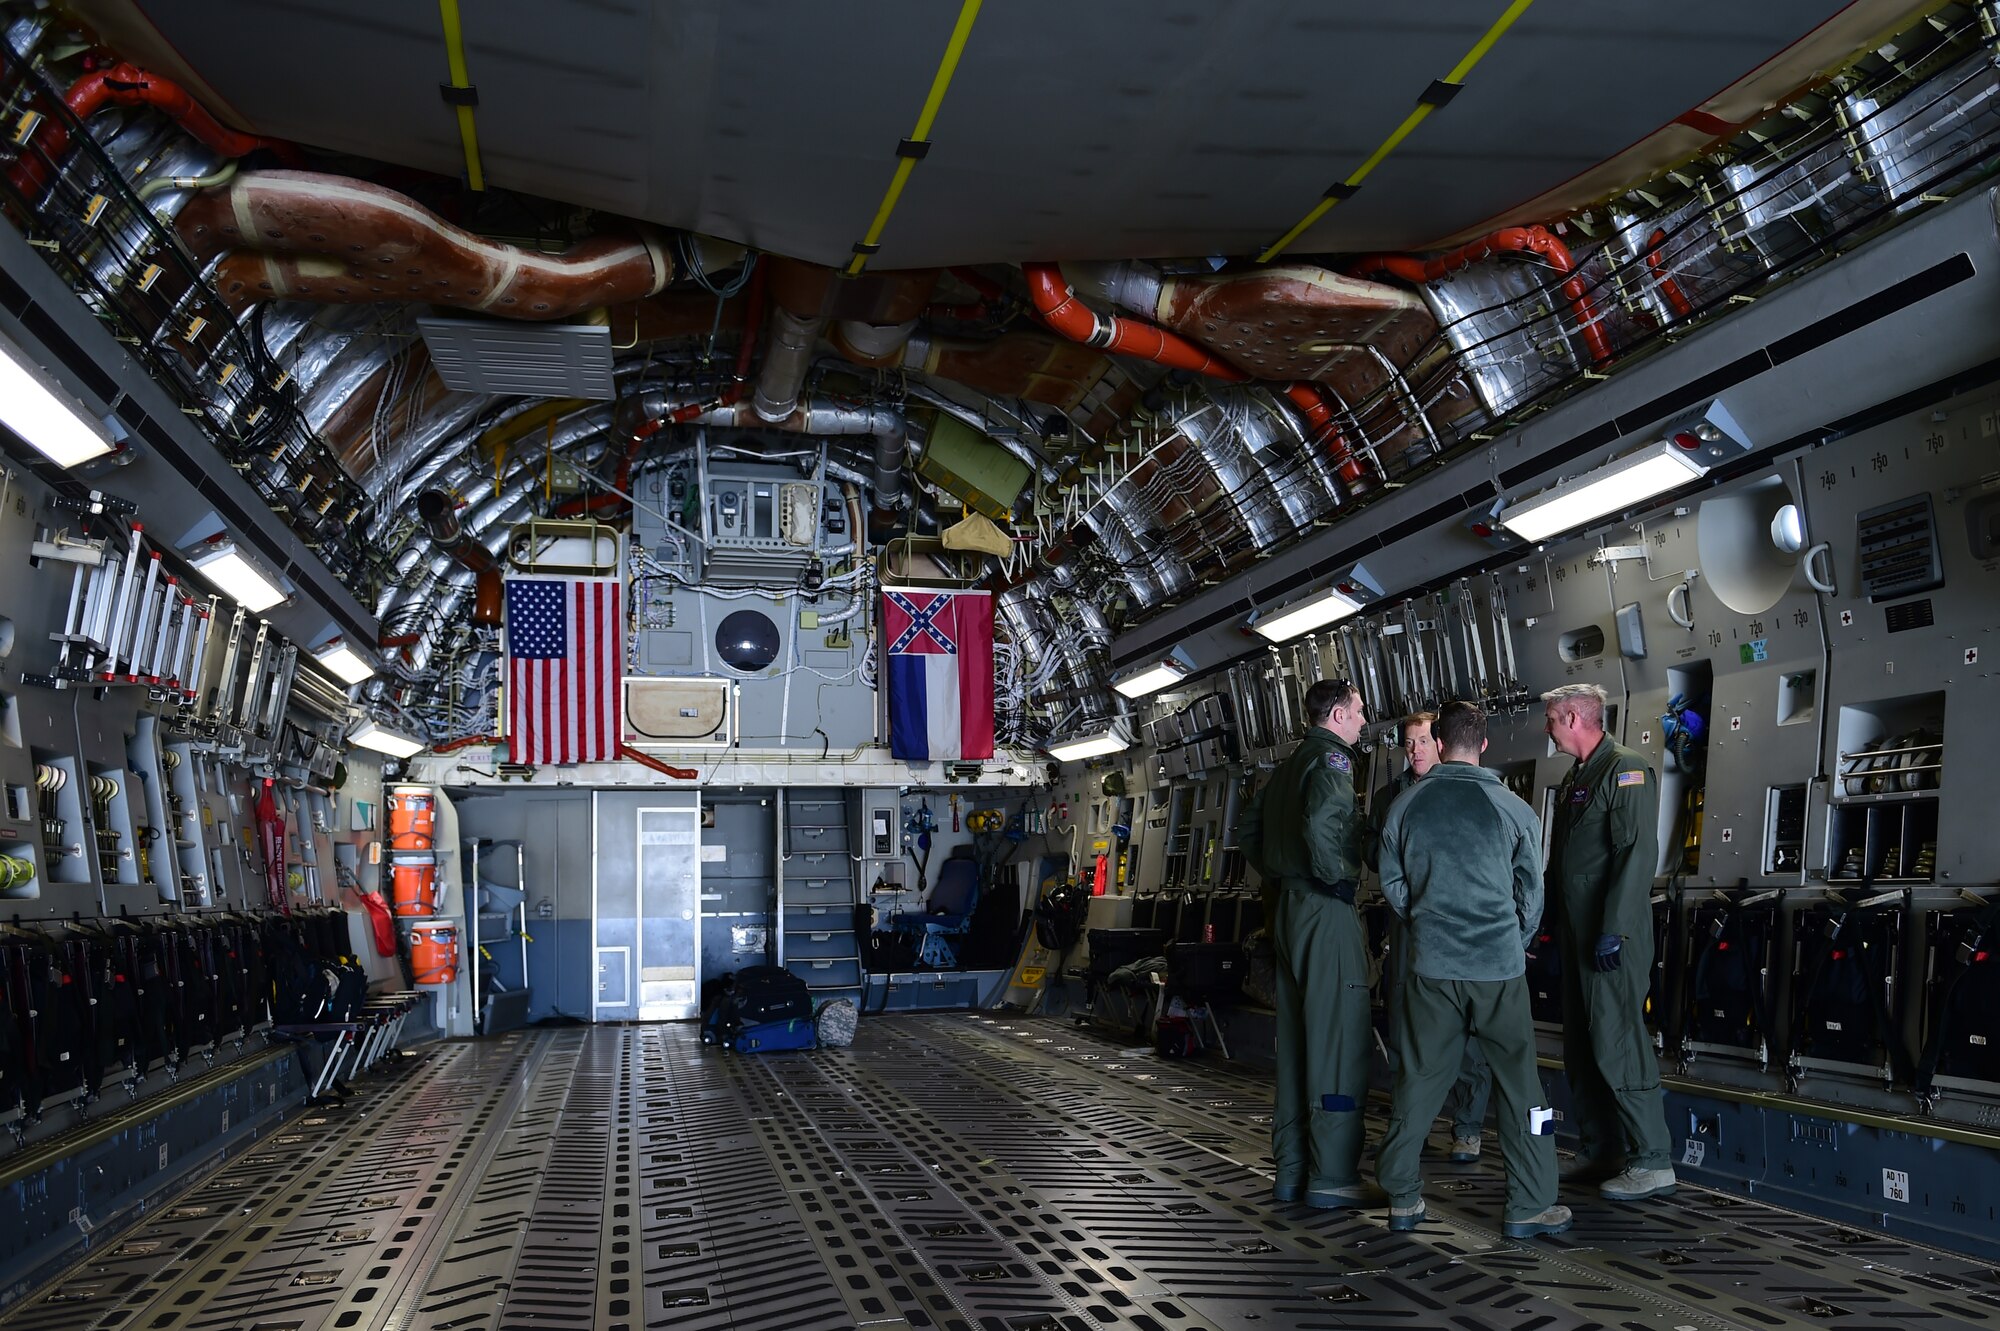 Loadmasters, from the 172nd Airlift Wing, discuss cargo procedures March 15, 2016, on Buckley Air Force Base, Colo. The loadmasters assisted the 140th Wing load equipment that will be used in an exercise taking place at Tyndall AFB, Florida.(U.S. Air Force photo by Airman 1st Class Luke W. Nowakowski/Released)